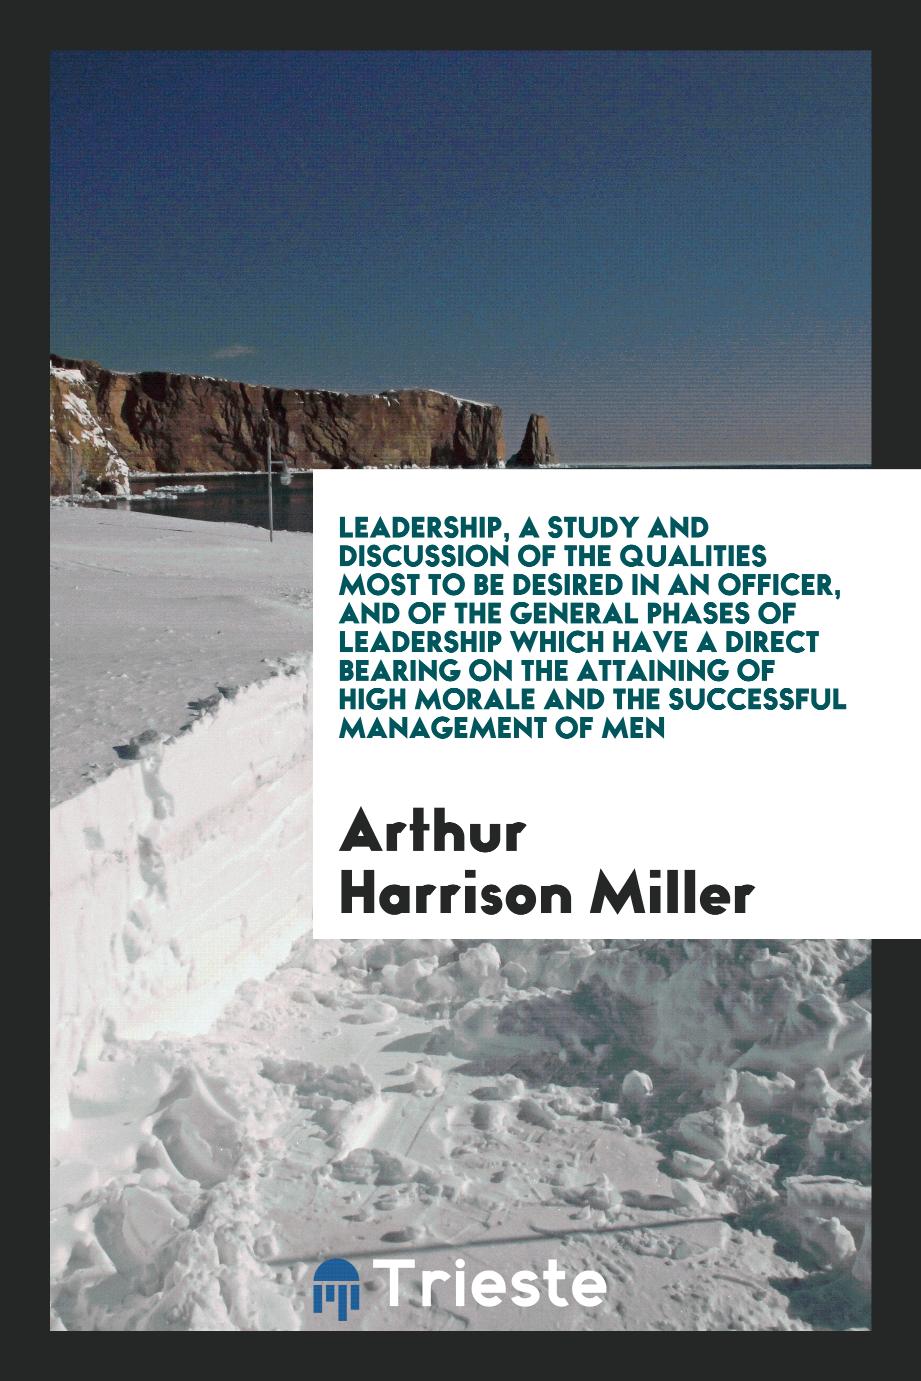 Leadership, a study and discussion of the qualities most to be desired in an officer, and of the general phases of leadership which have a direct bearing on the attaining of high morale and the successful management of men